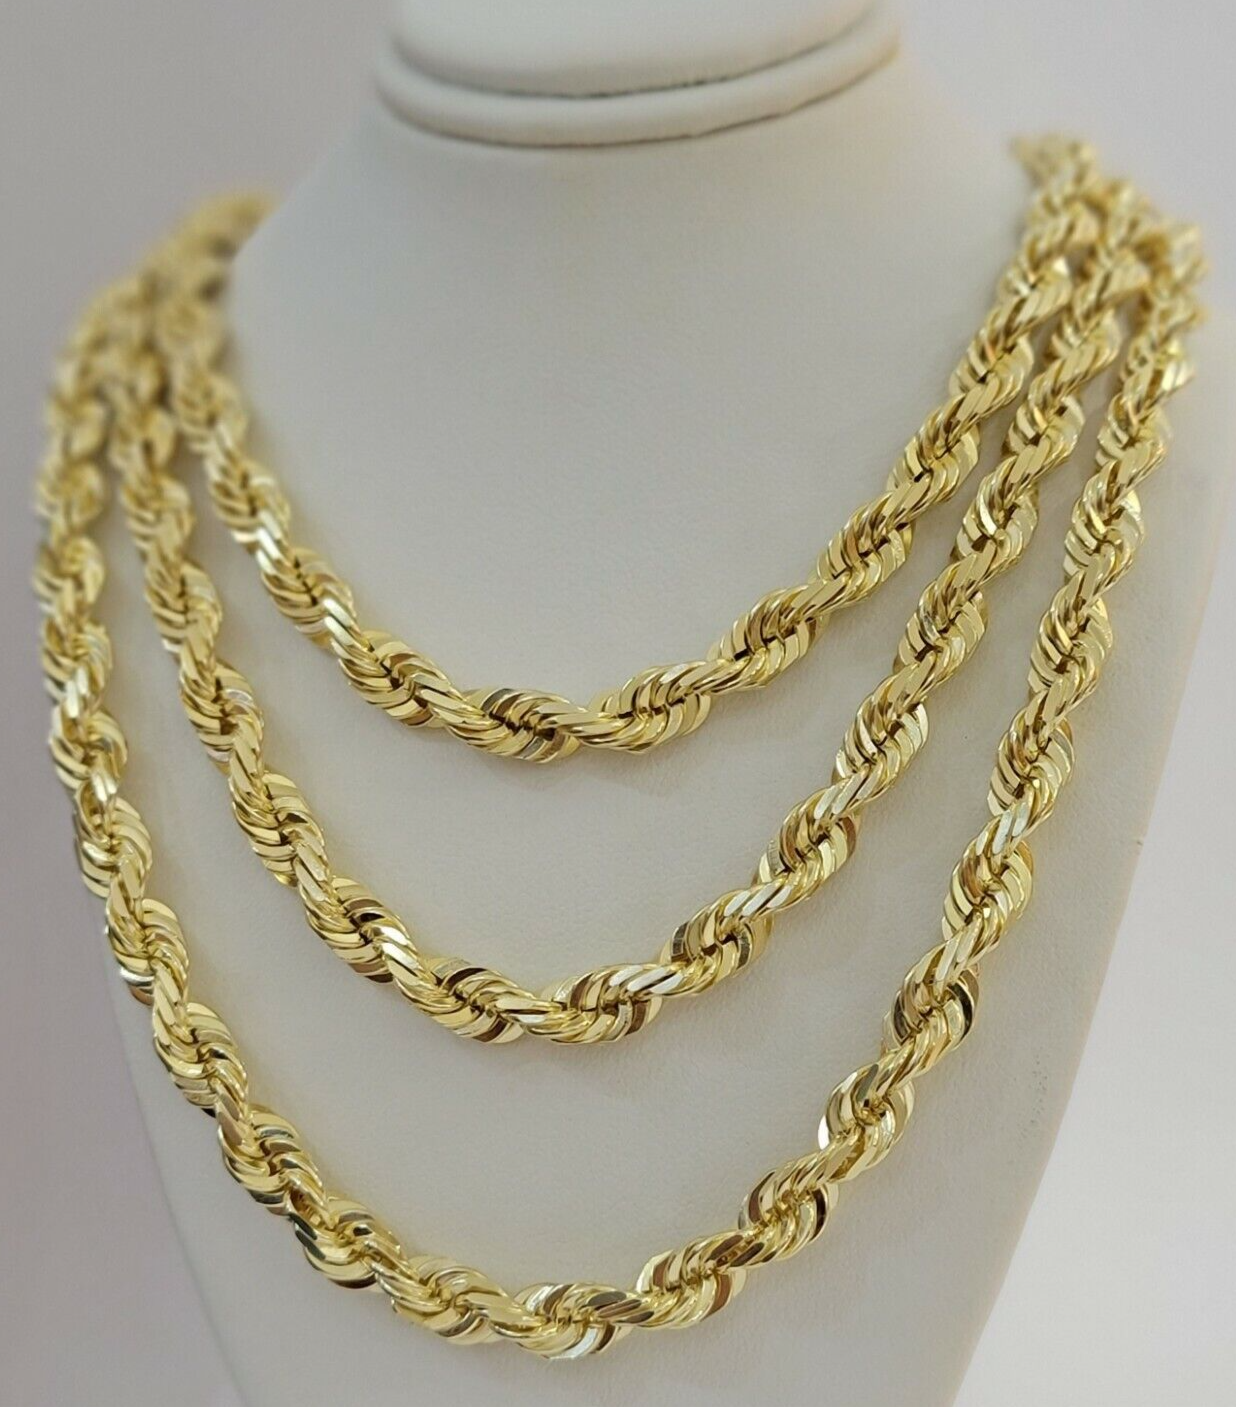 REAL Men 10K Yellow Gold Rope Chain Necklace 8mm 22 Diamond Cut